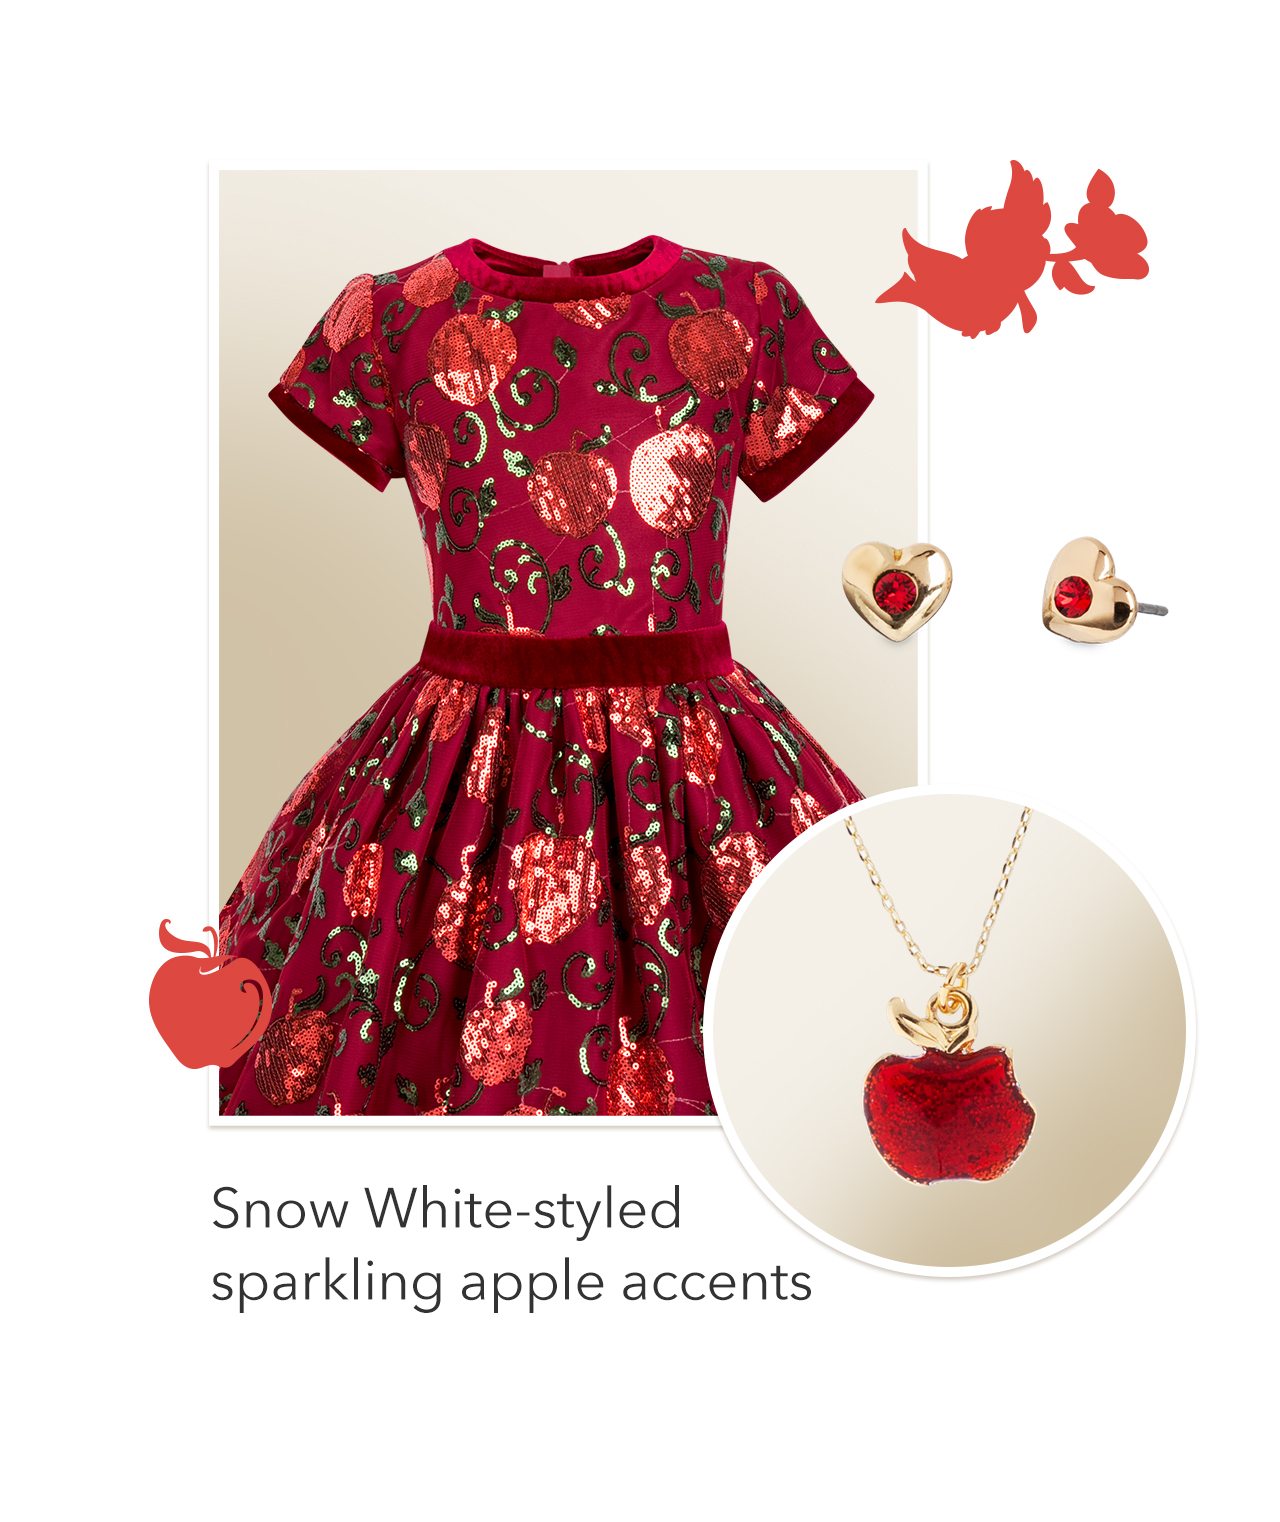 Snow White-styled sparkling apple accents | Shop Now